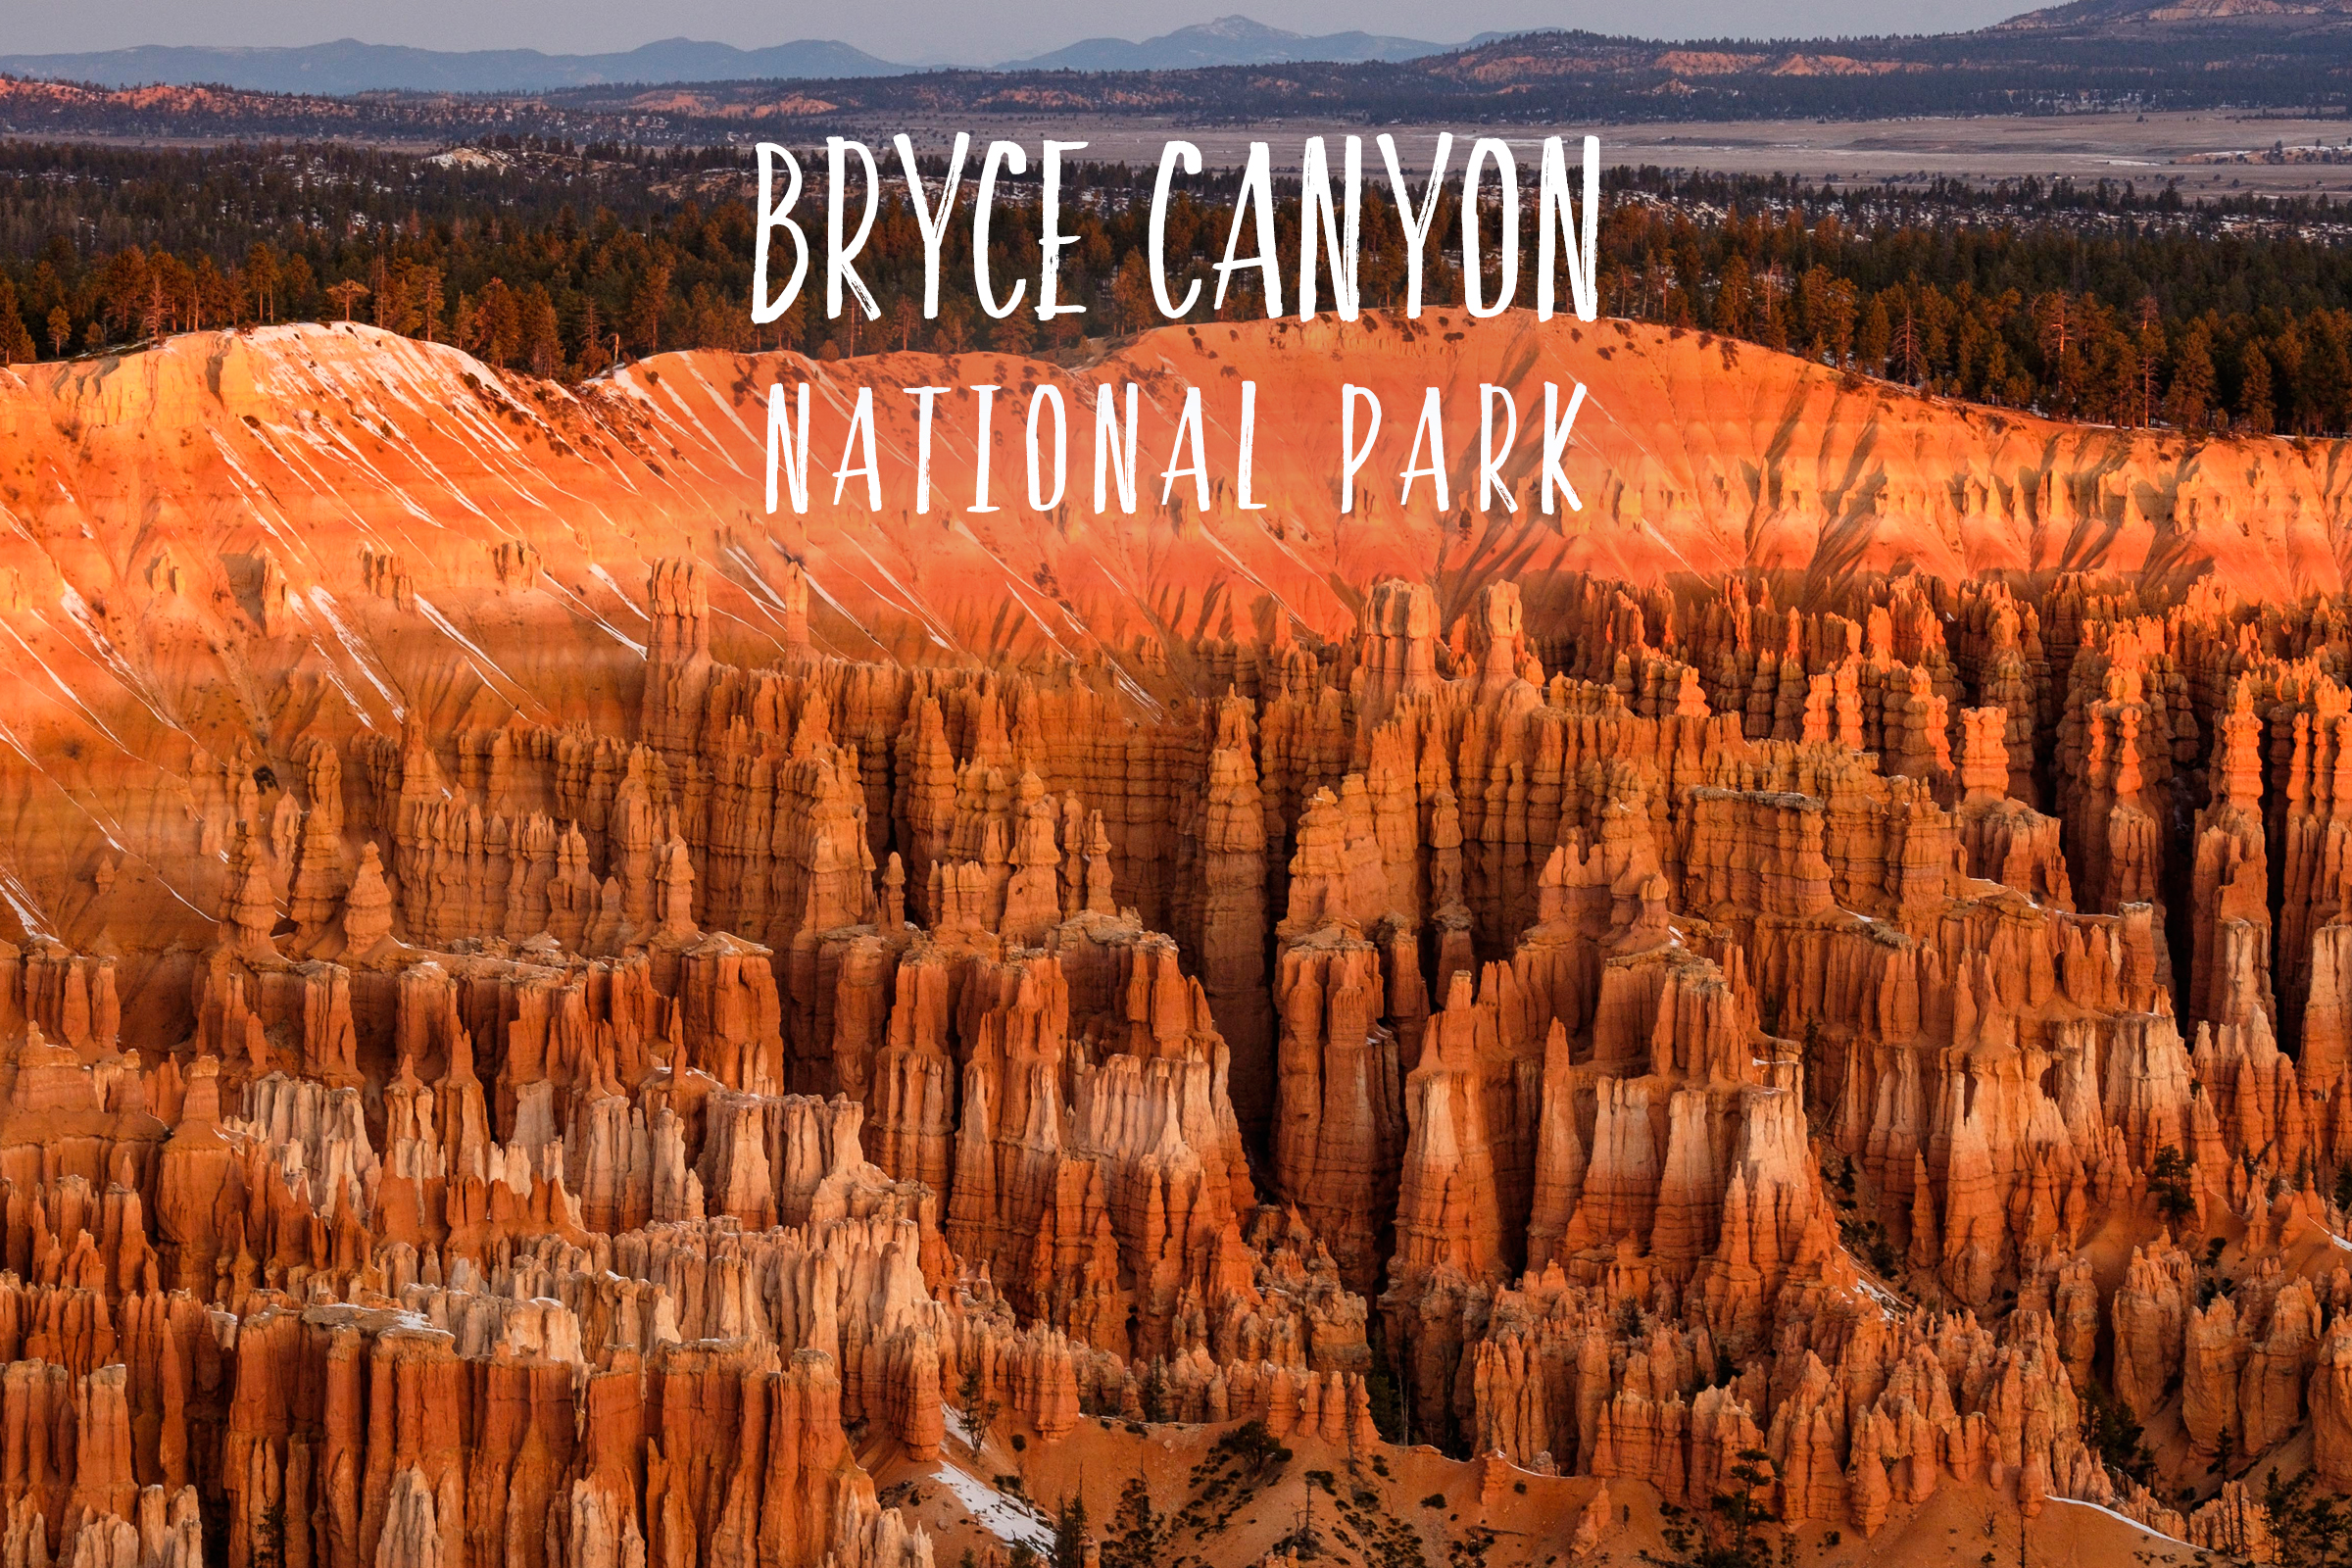 59in52_np-page_bryce-canyon-02.jpg